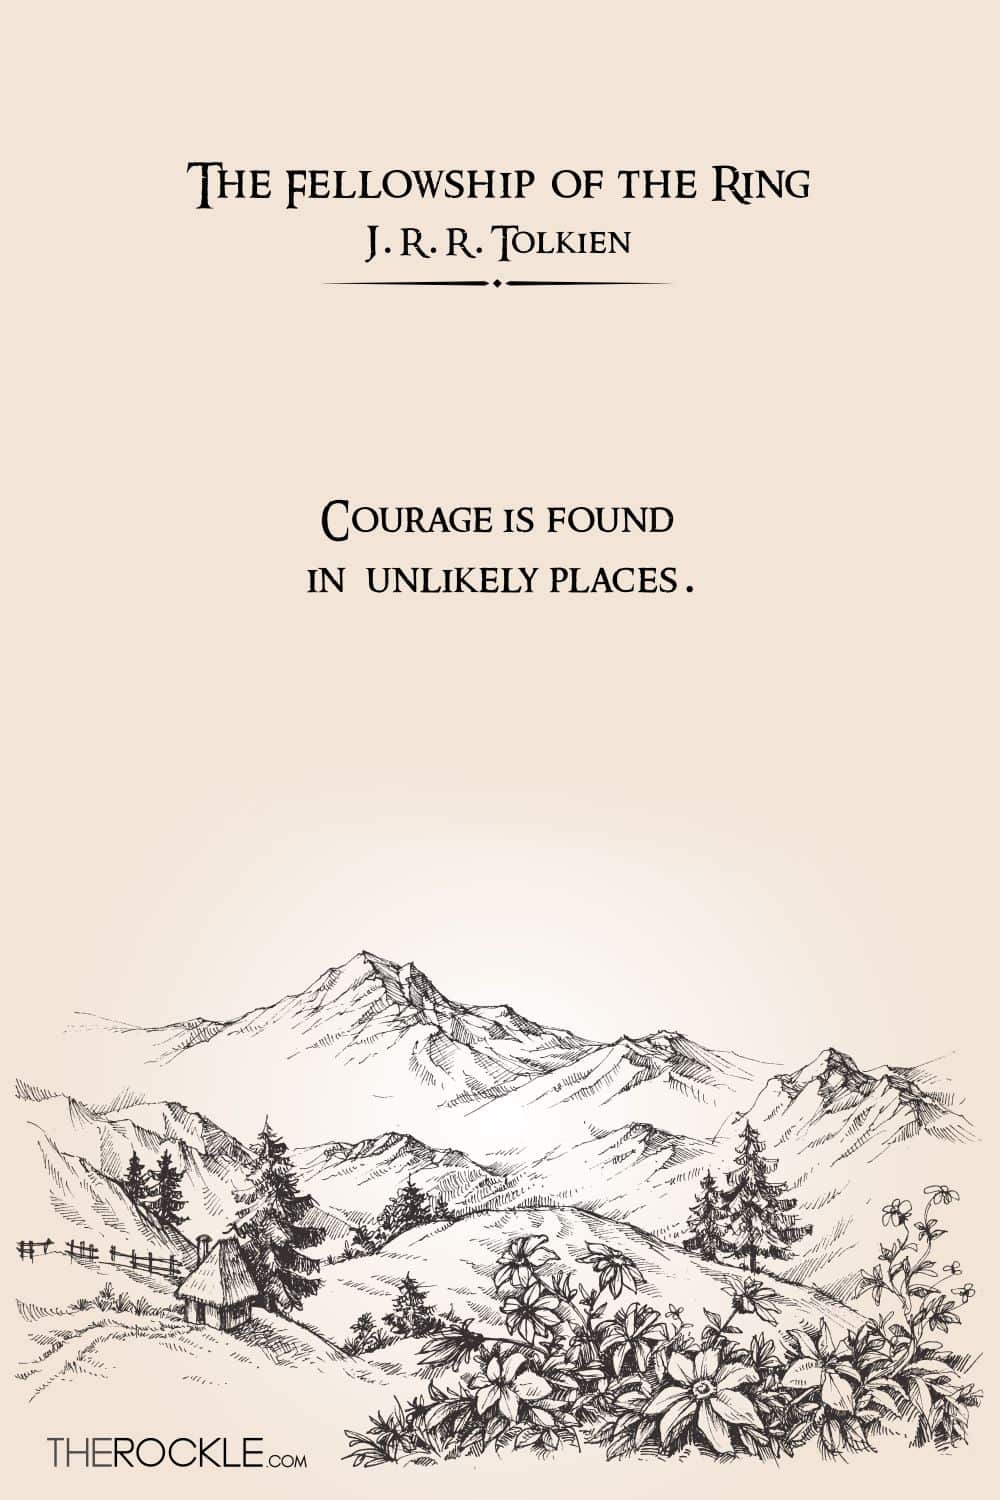 J.R.R. Tolkien's quote about courage